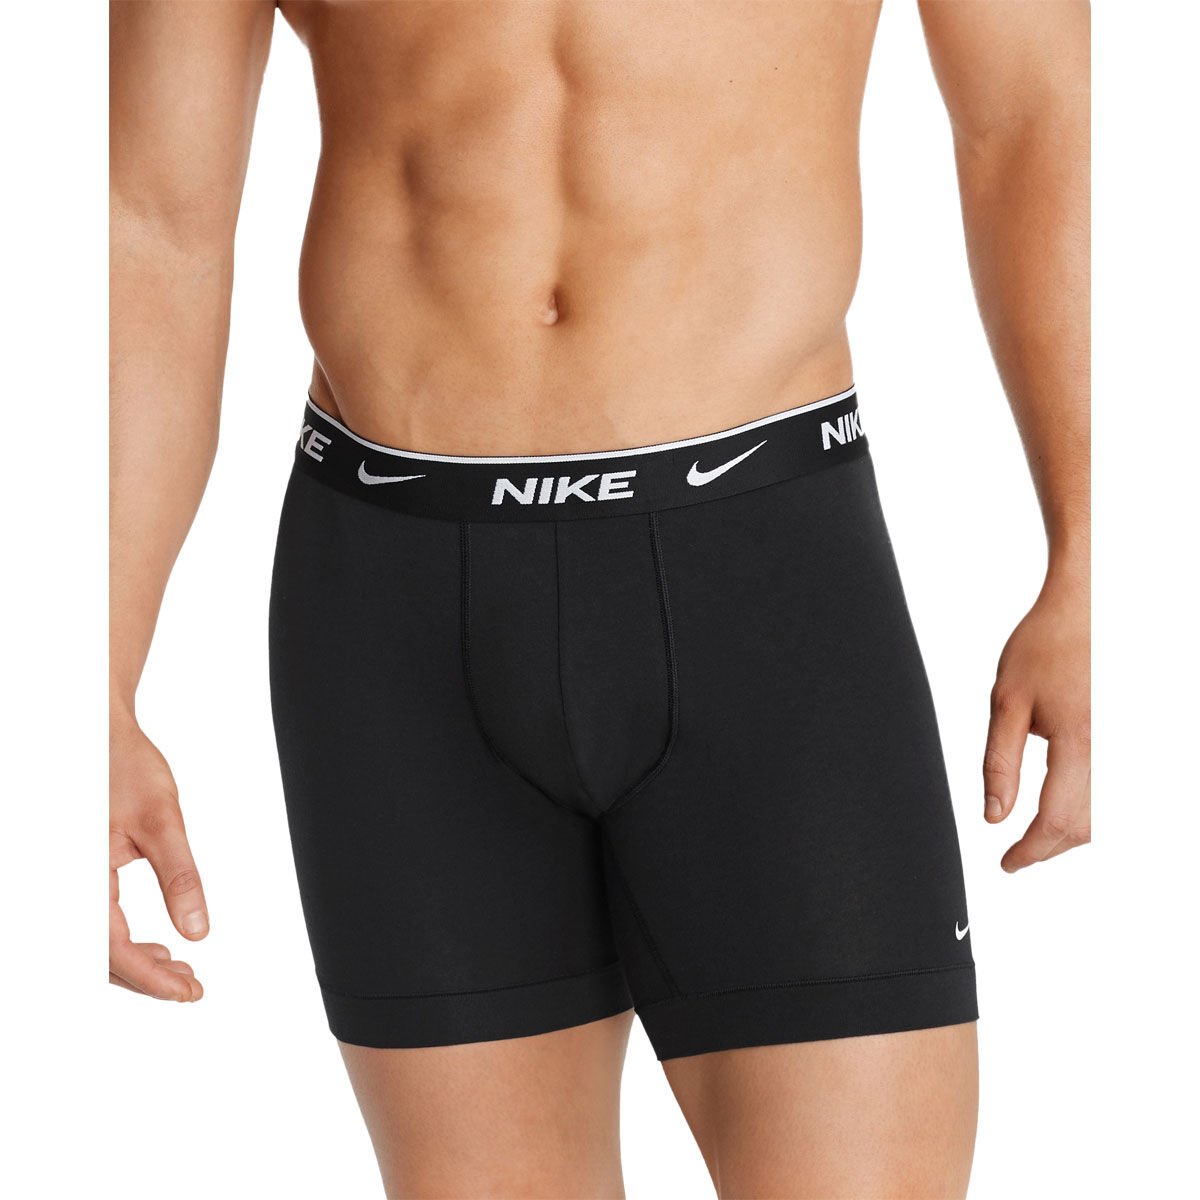 Buy Nike Men's Cotton Briefs (Pack Of 3) (Black_Xl) at